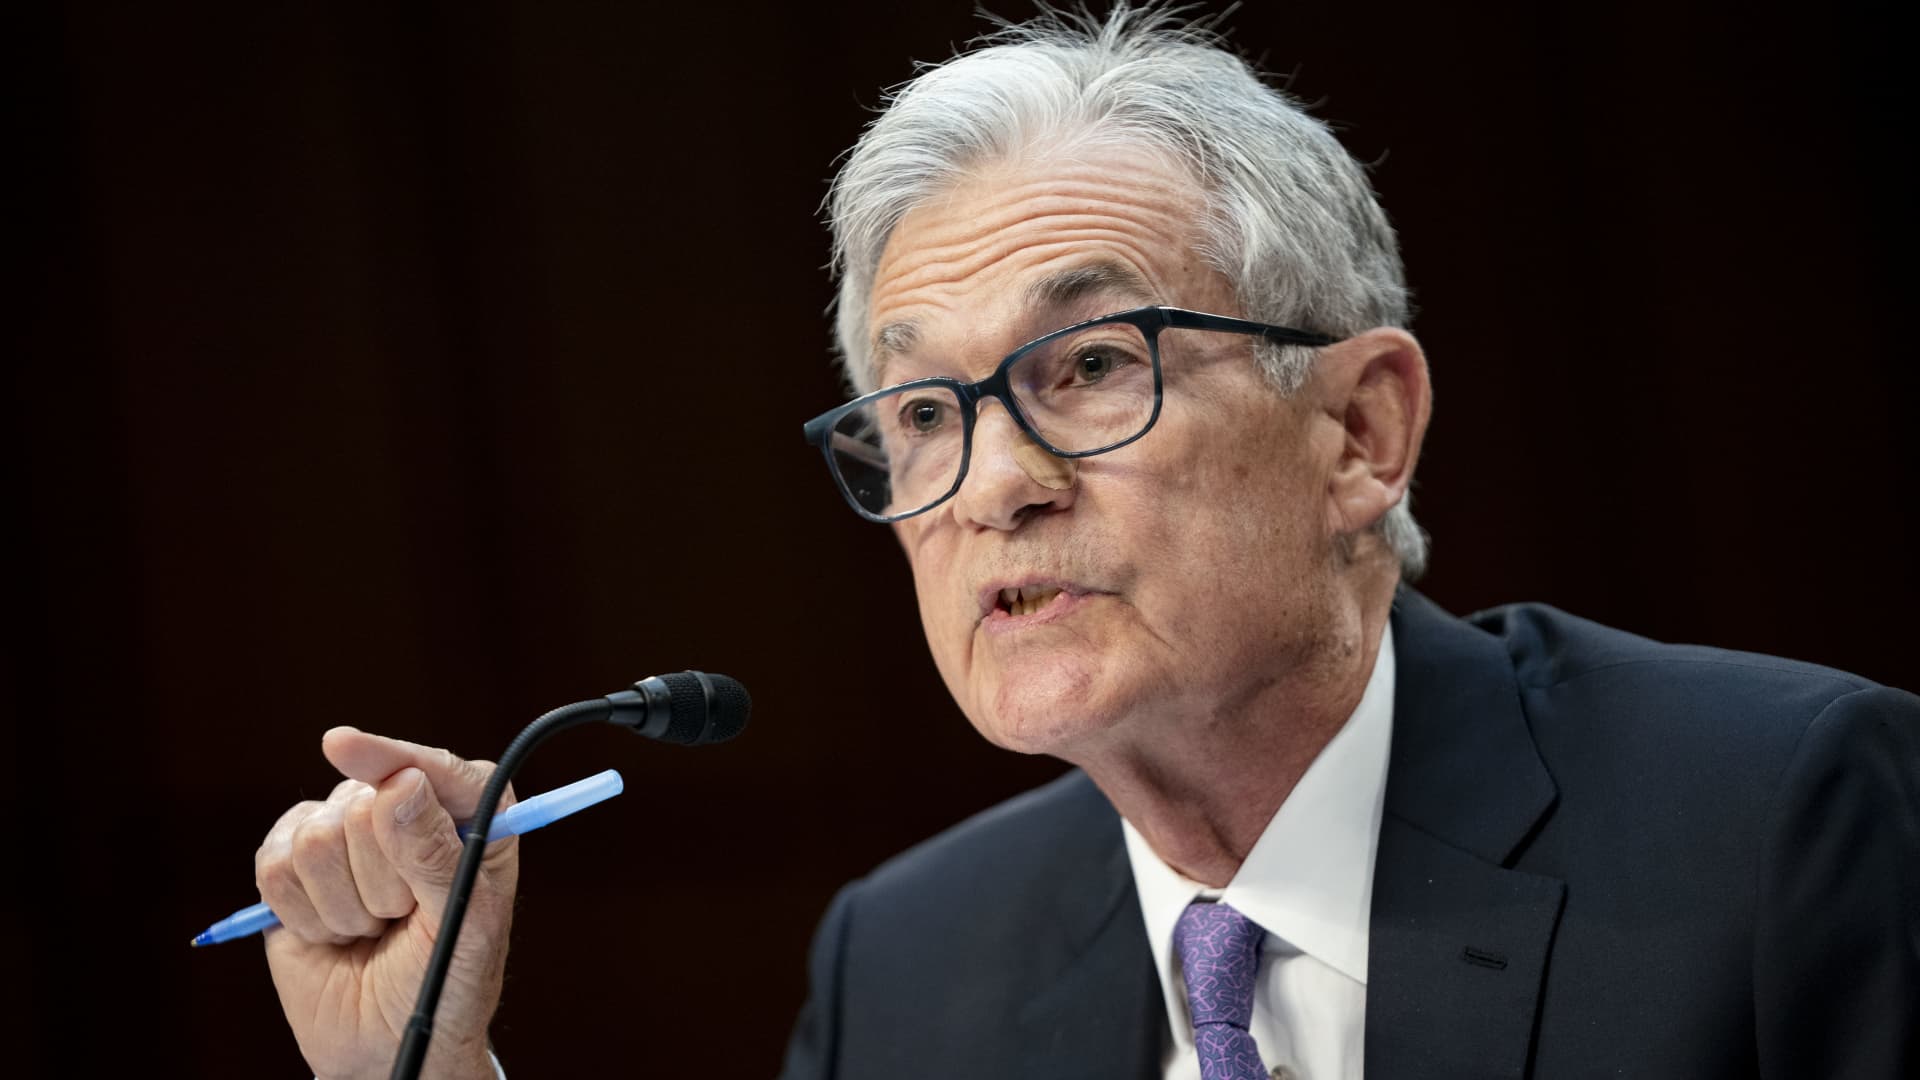 Watch Fed Chairman Powell testify live before the House of Representatives finance panel